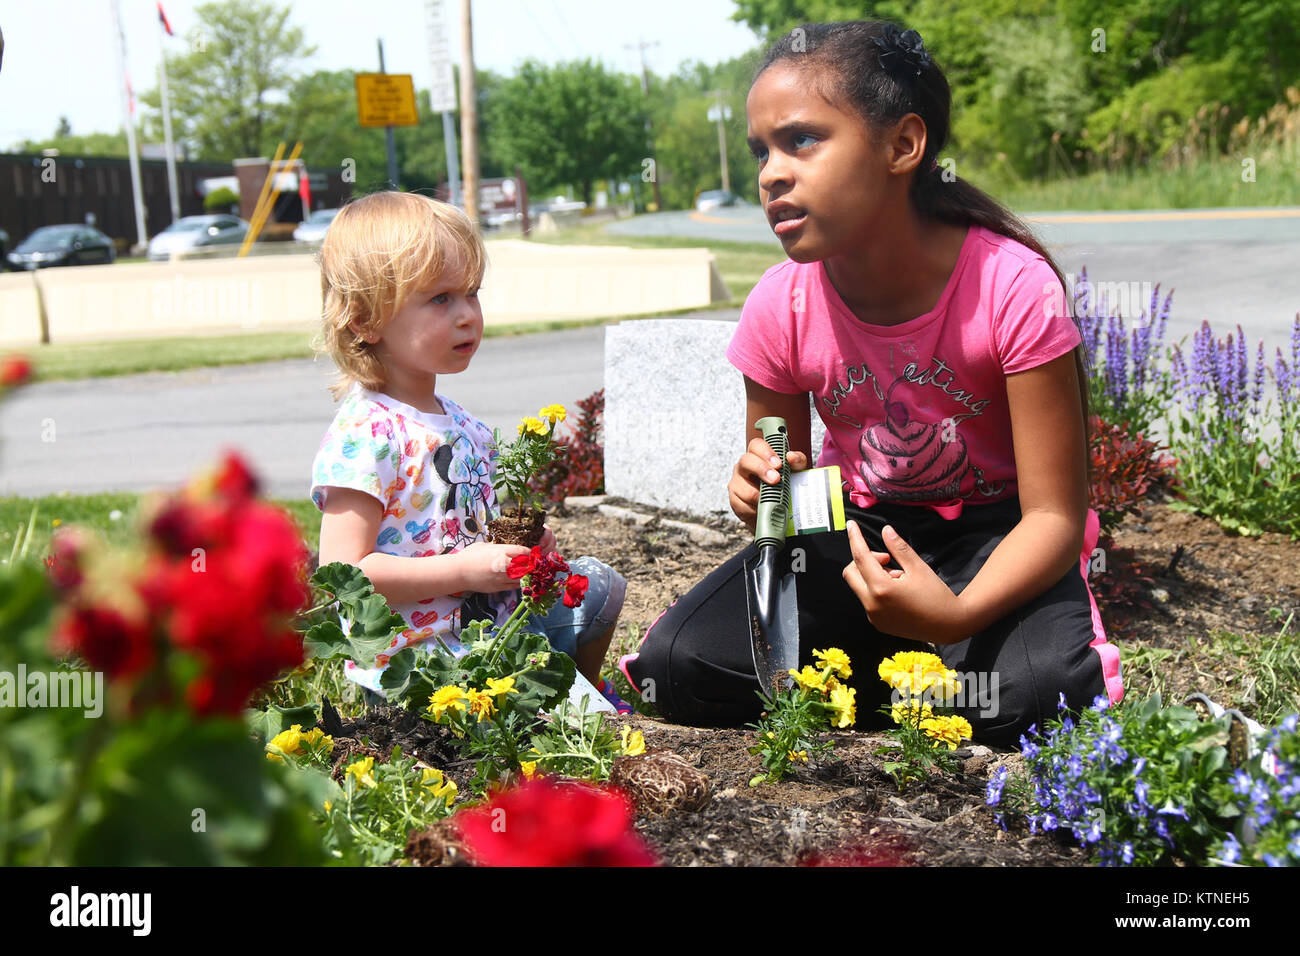 Ava Murphy, daughter of Joanne Murphy, and Anastasia Prince, daughter of Marisol Bonilla, help as members of the New York National Guard Youth Program plant a rainbow of red geraniums, yellow marigolds and blue lobelias on Armed Forces Day May 18 at the armory of the 42nd Infantry Division Headquarters in Troy, N.Y. The NYNG Youth Program aims to support children of military-affiliated members and planted flowers in Troy and in Latham, N.Y. (U.S. Army Photo by Spc. J.p. Lawrence, 42nd Infantry Division Public Affairs Office). Stock Photo